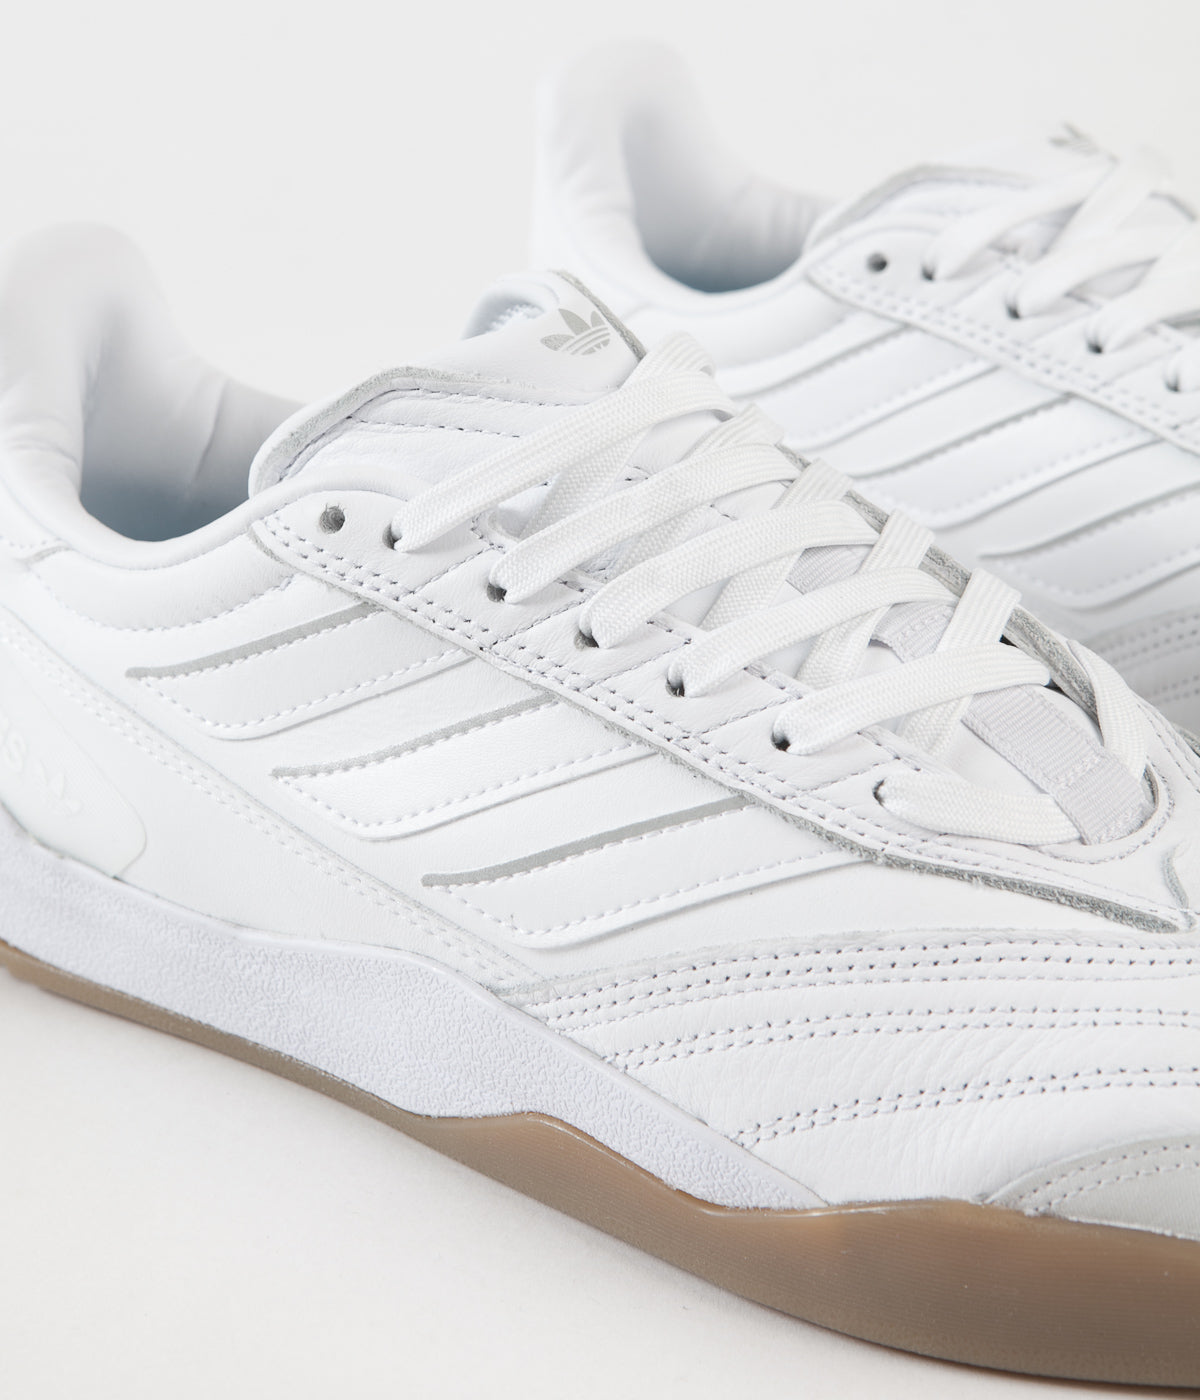 adidas copa nationale white